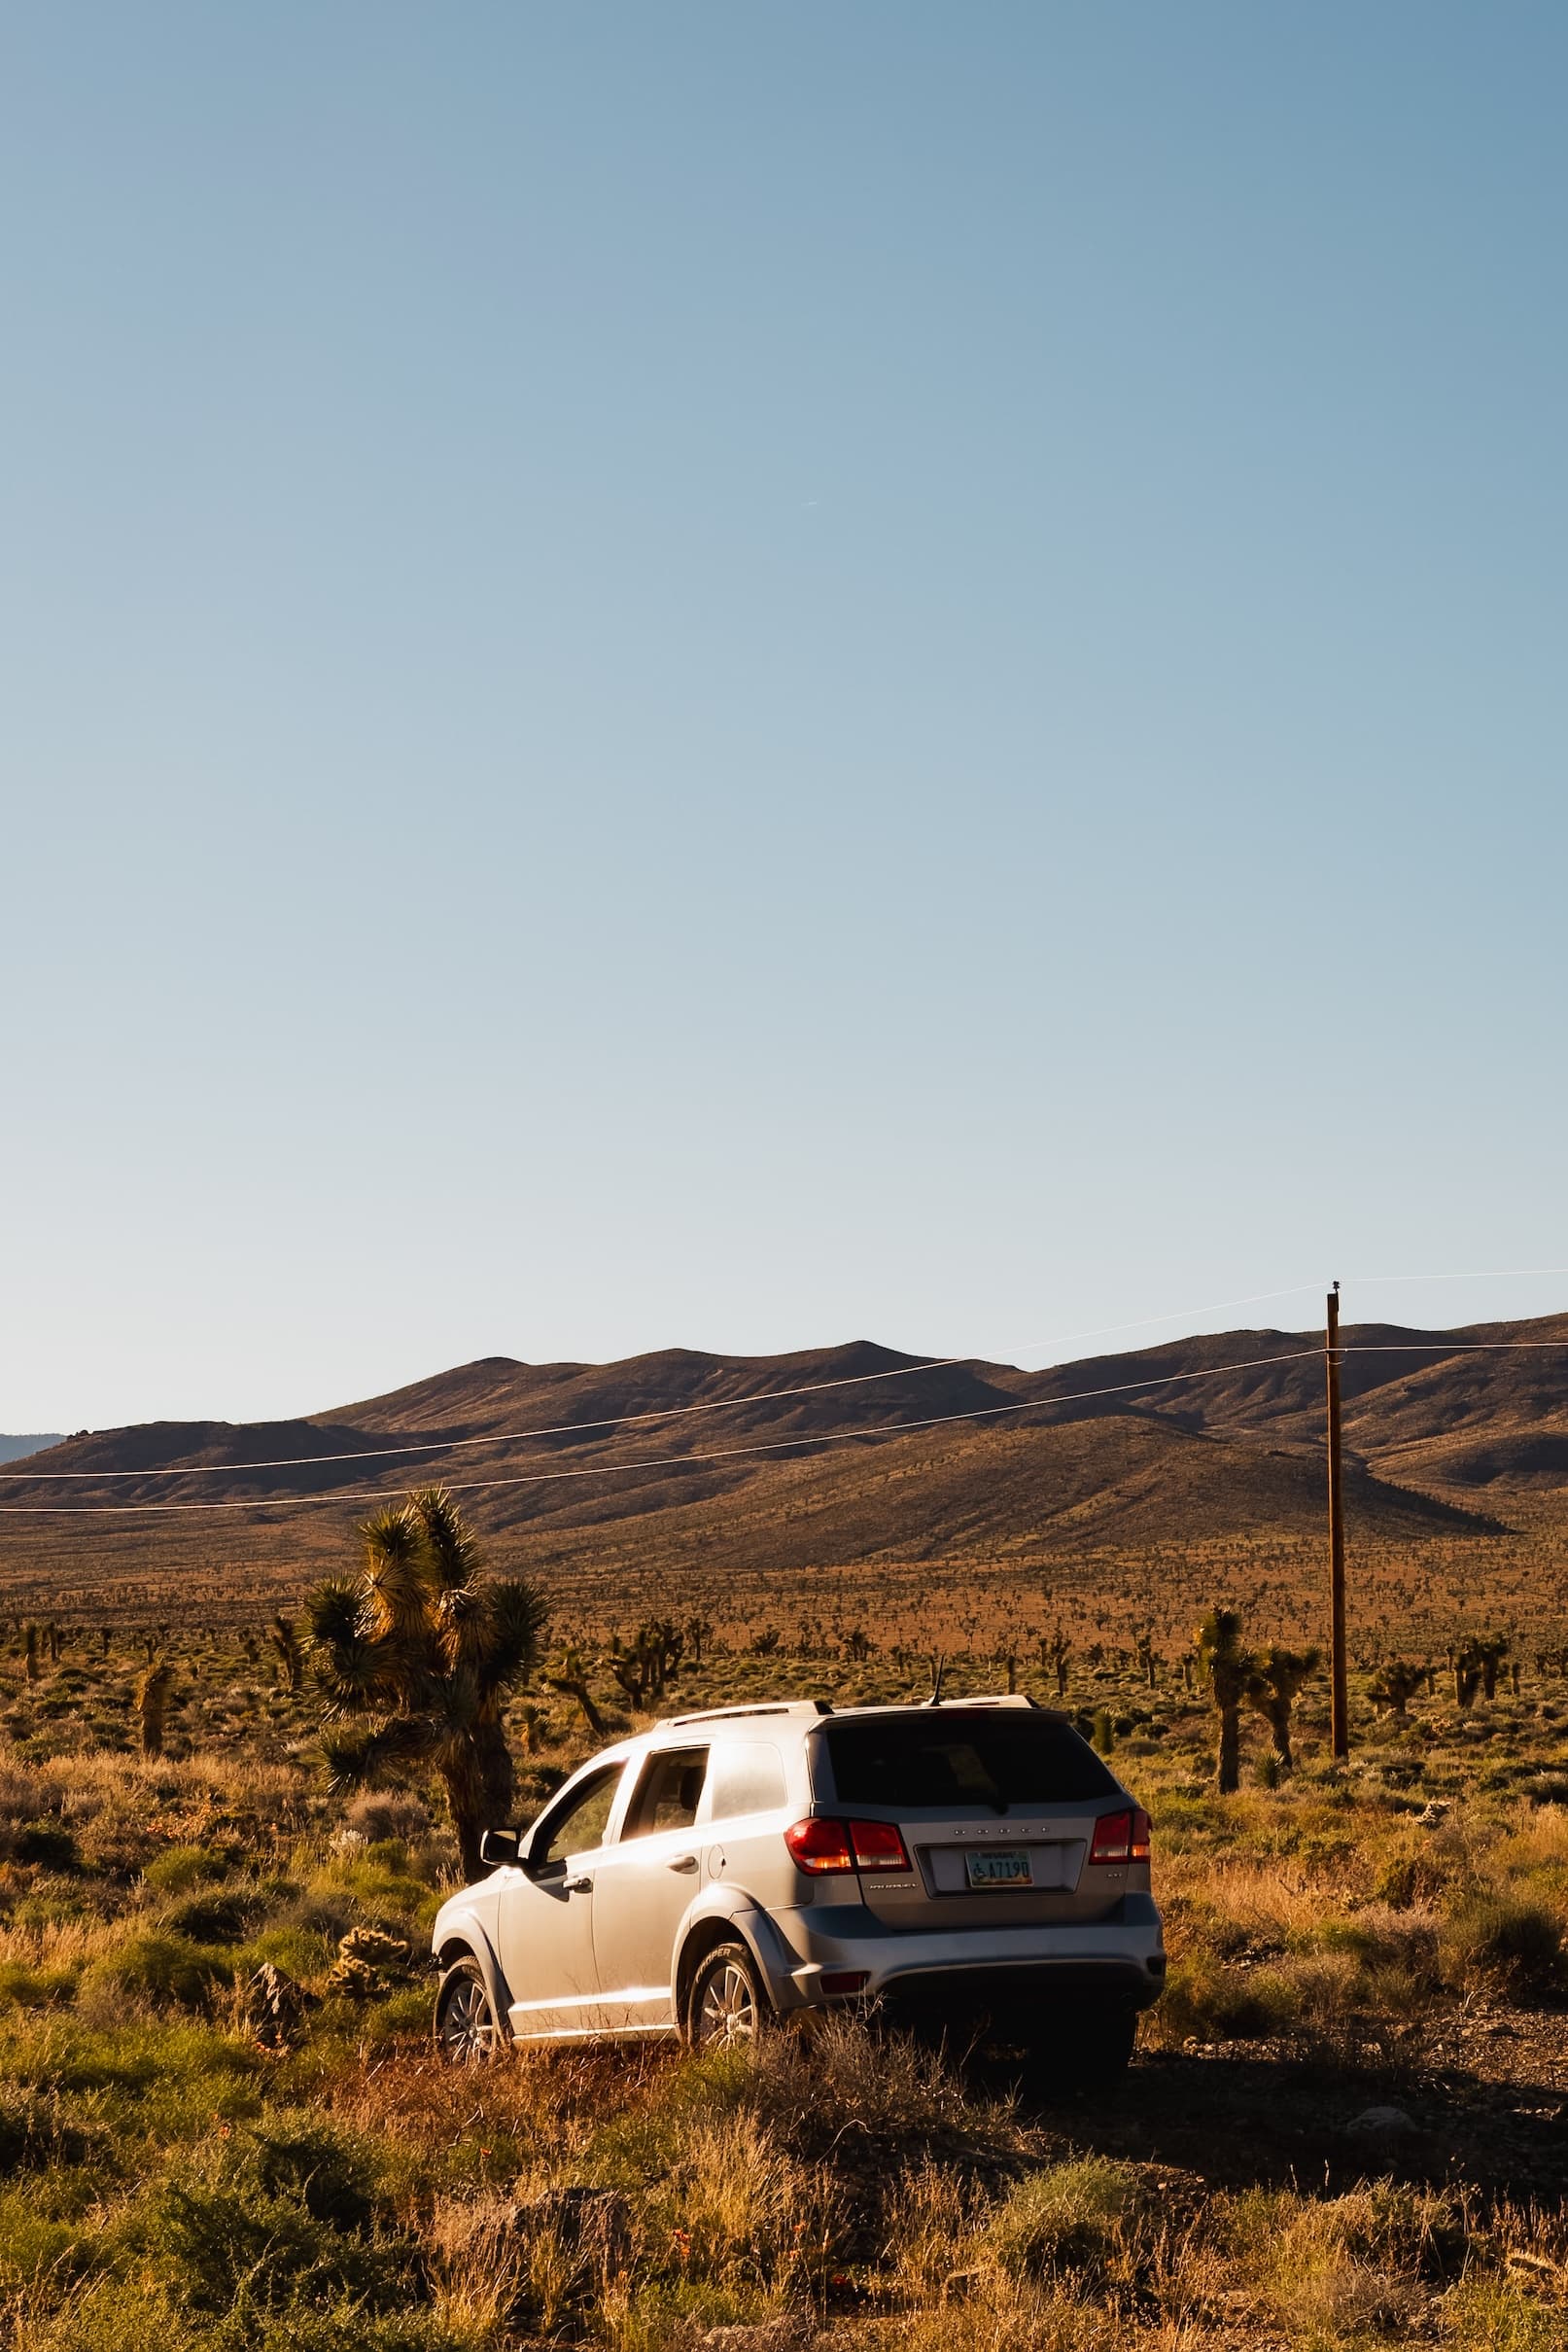 A silver SUV in the middle of the desert surrounded by Joshua trees, with rolling hills in the distance under a clear sky.